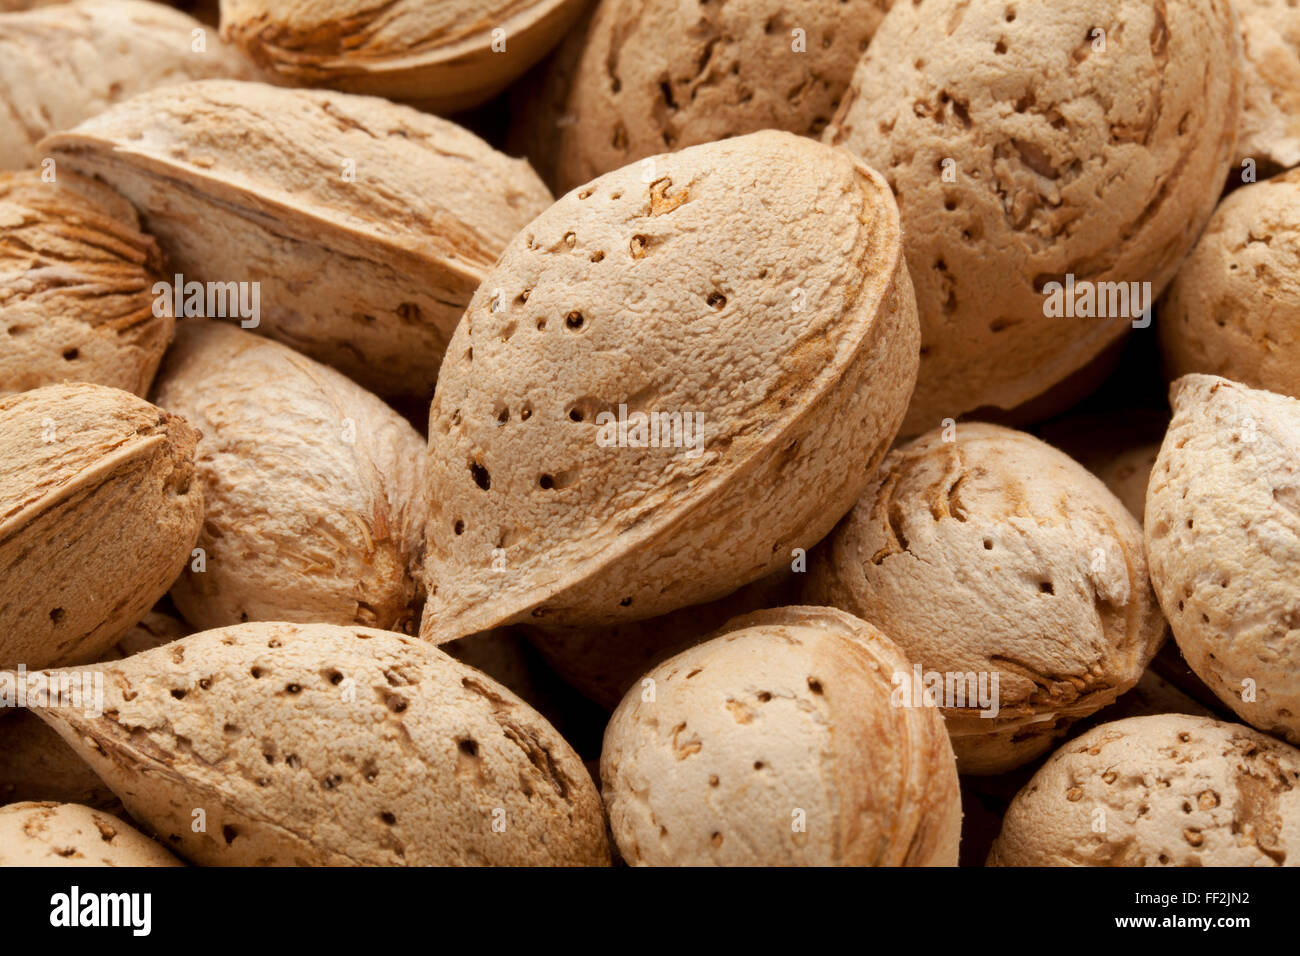 Whole Almonds in the pod close up full frame Stock Photo